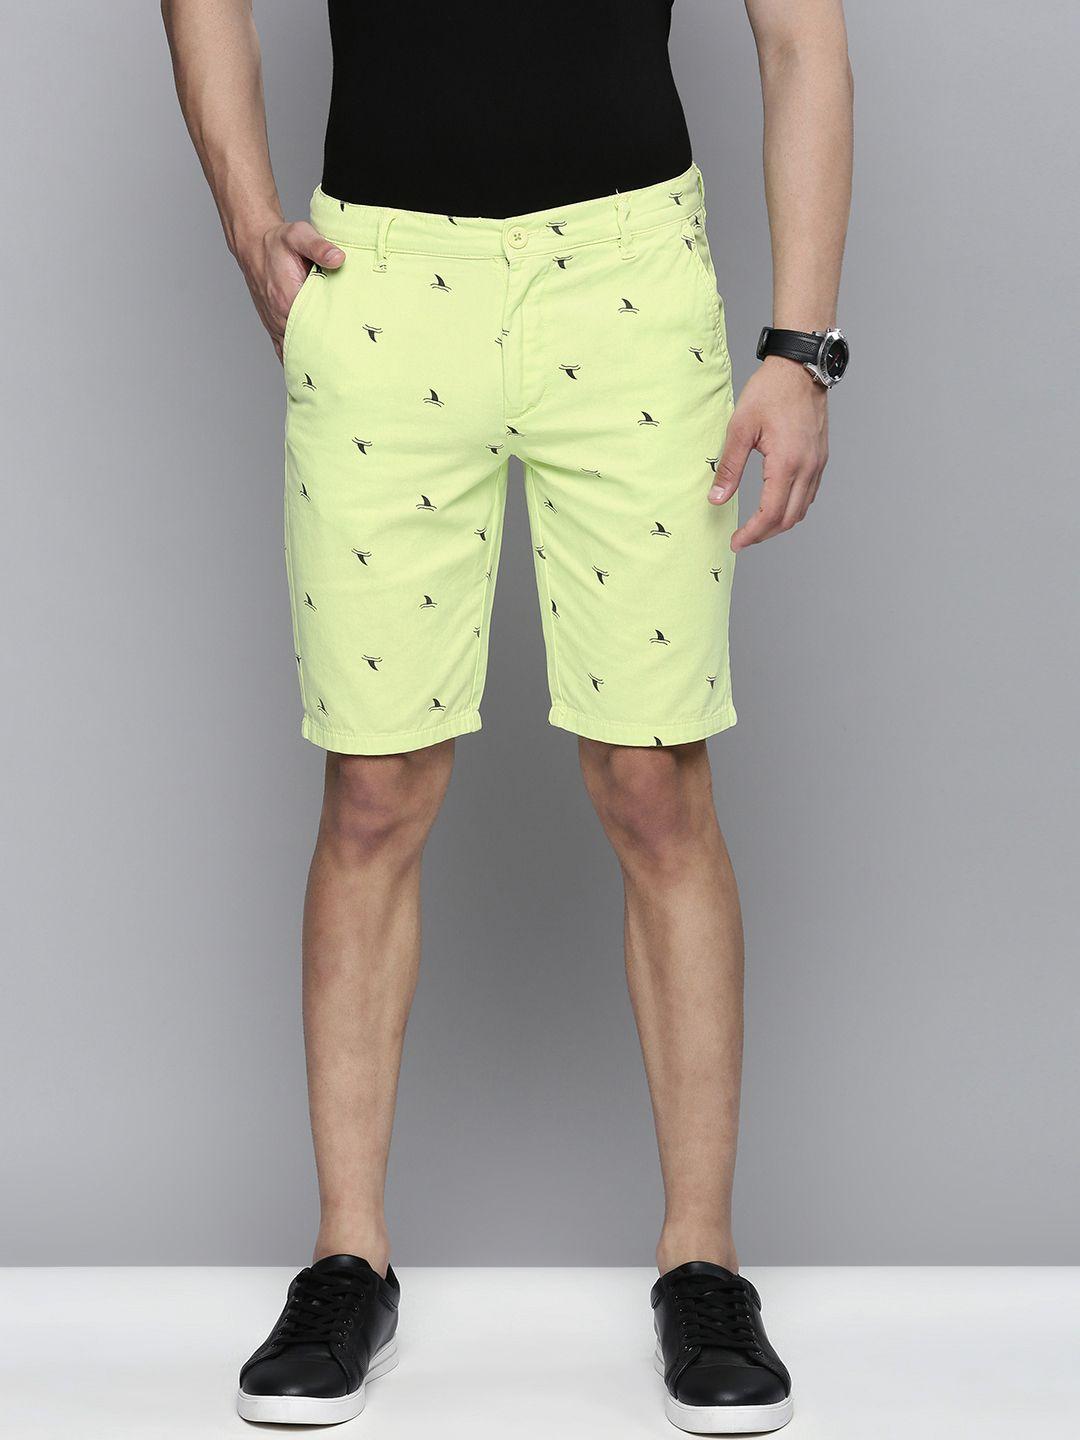 The Indian Garage Co Men Lime Green Printed Slim Fit Chino Shorts